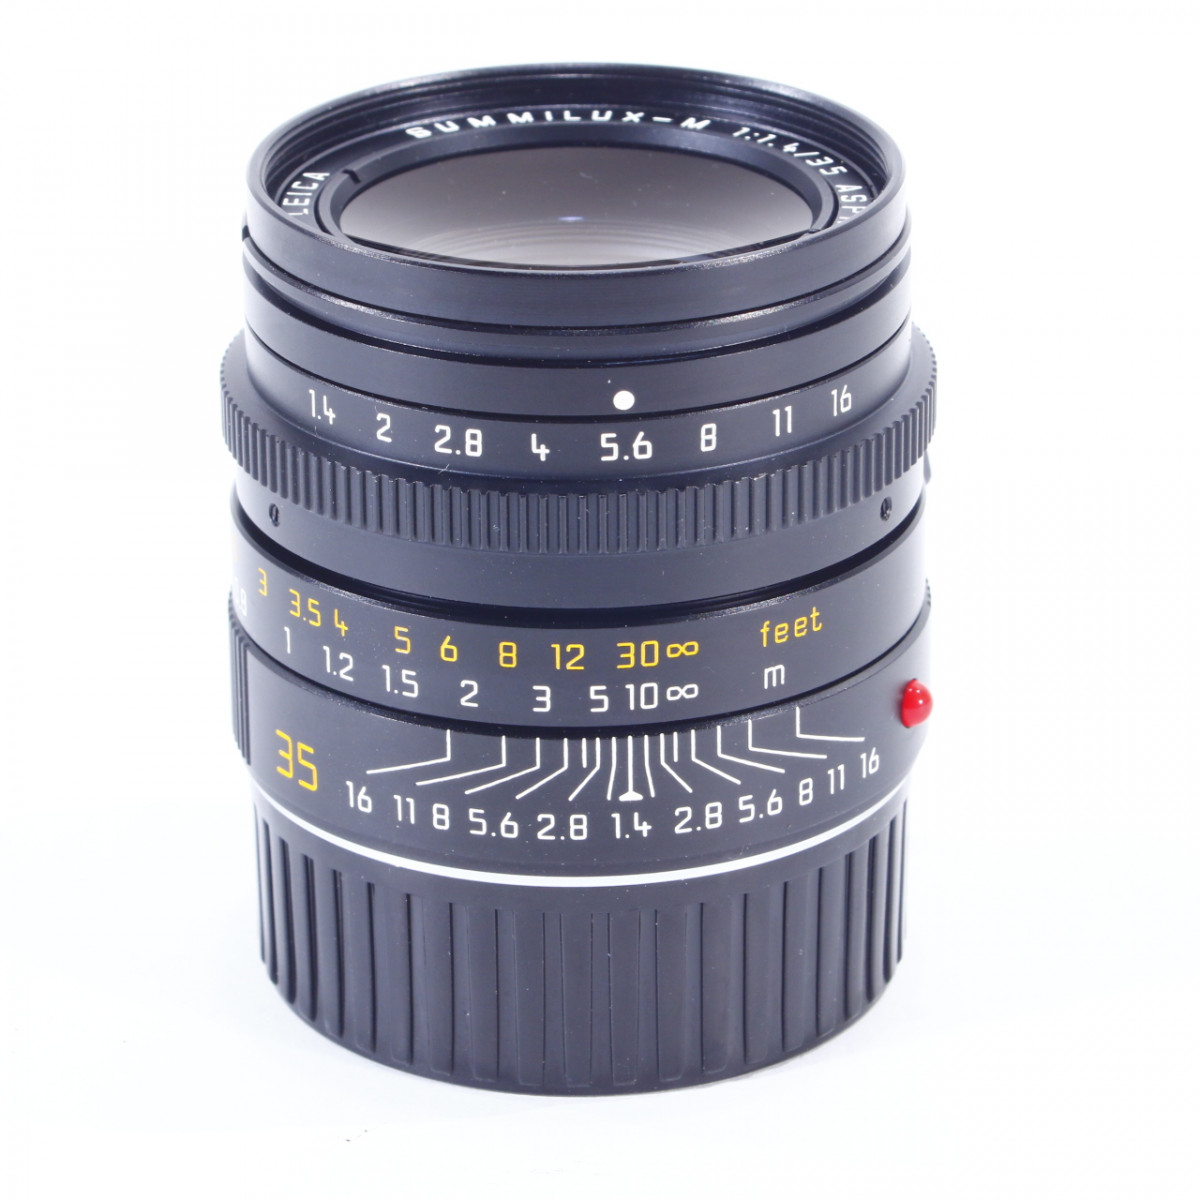 This Beautiful Leica 35mm f1.4 Has a Hard to Find Lens Hood